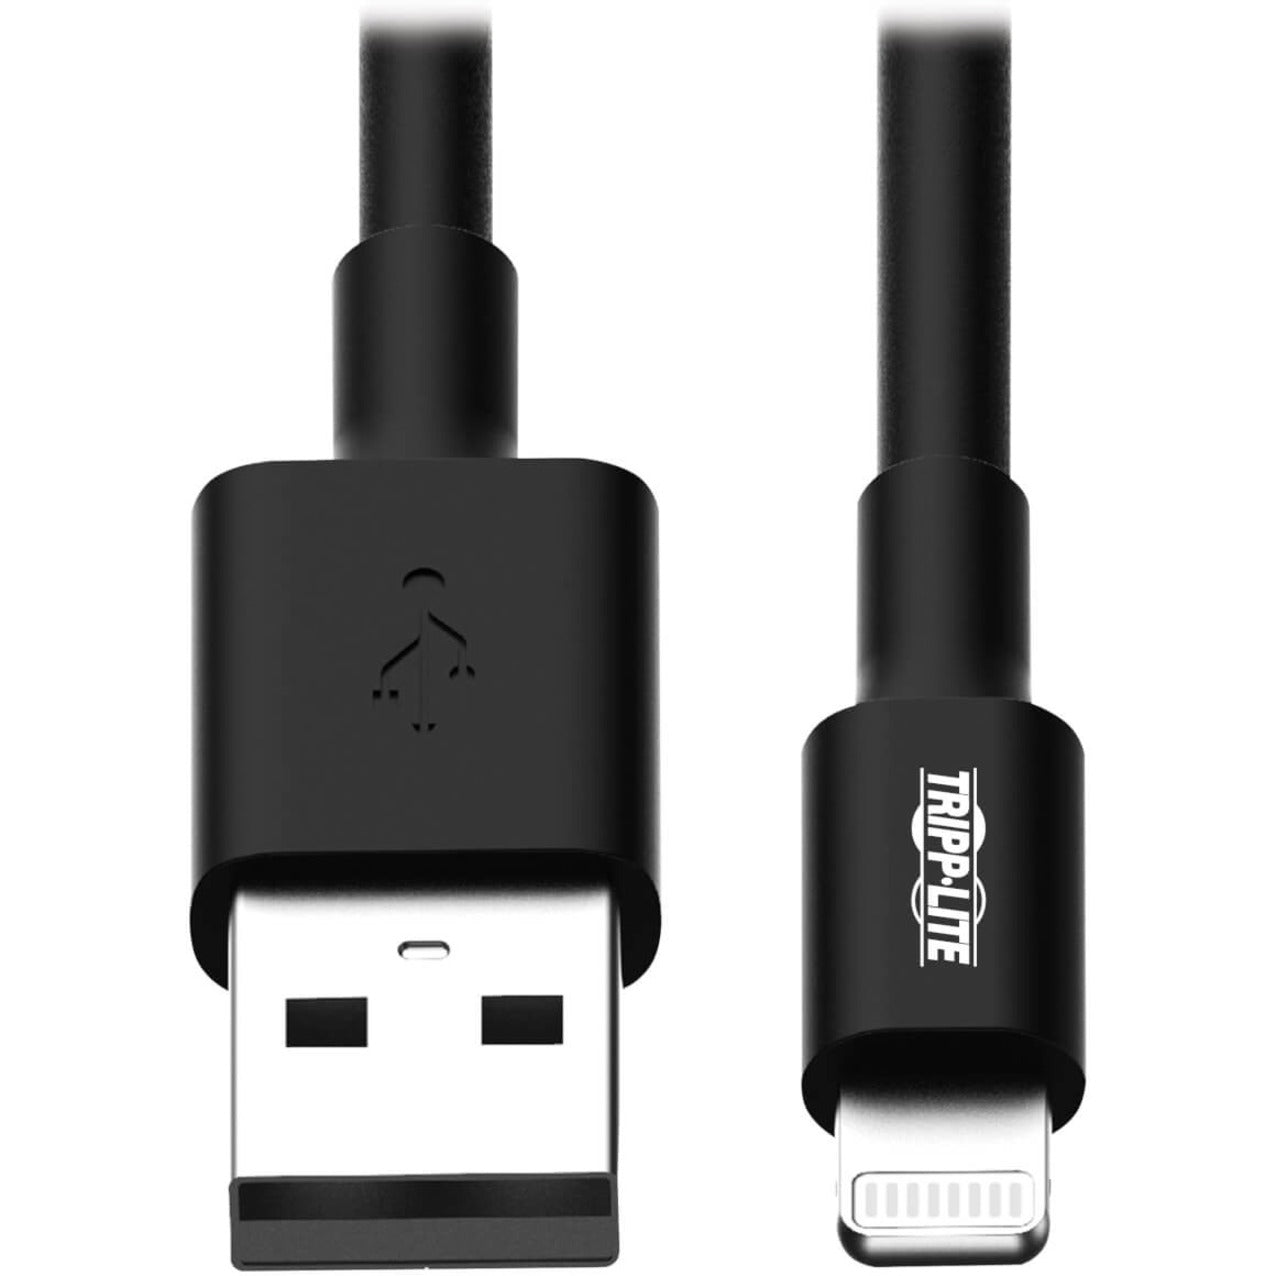 Tripp Lite M100-003-BK 3ft (1M) Black USB Sync / Charge Cable with Lightning Connector, Compatible with iPhone, iPad, iPod